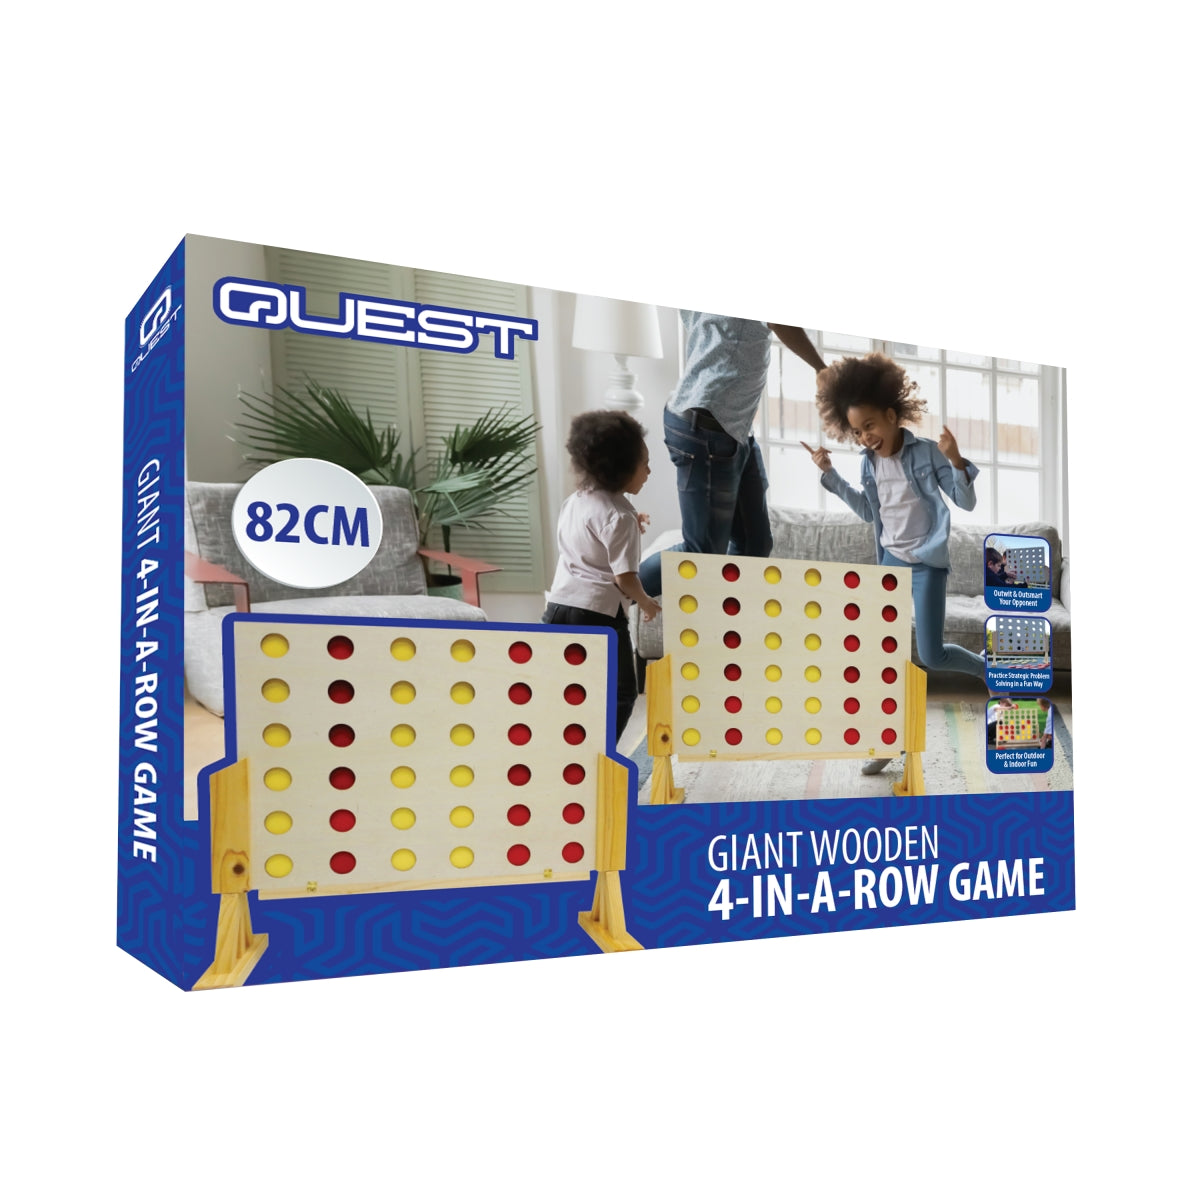 Quest 82cm Giant Wooden 4-in-a Row Game - Natural